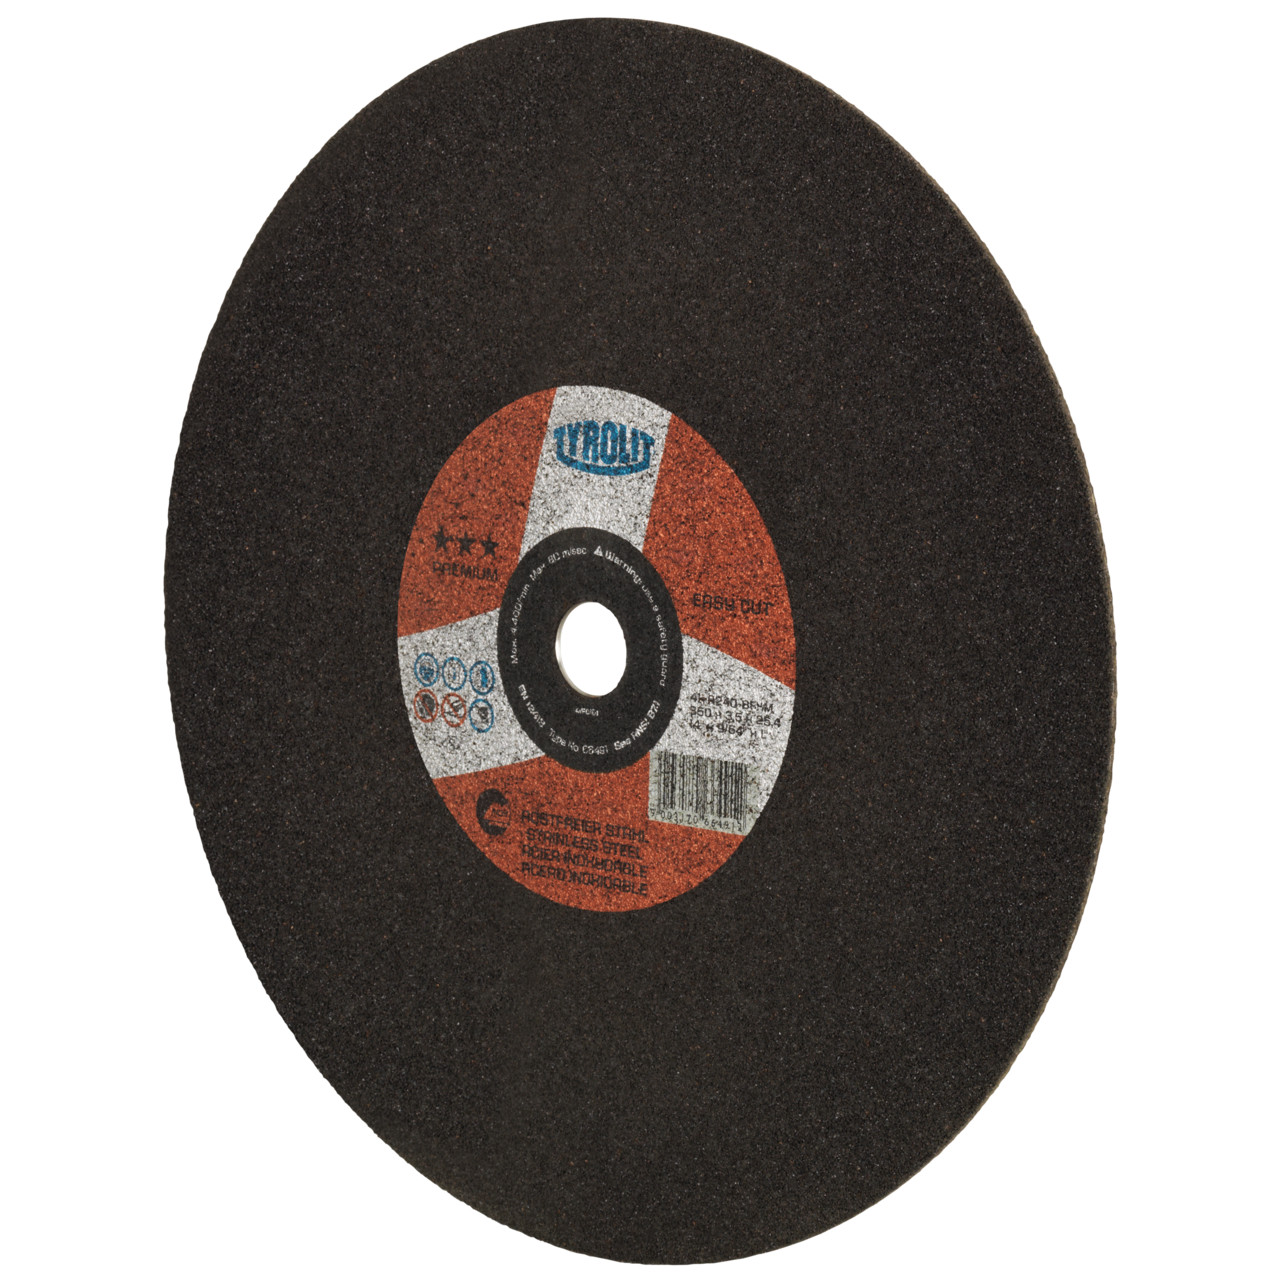 Tyrolit Cutting discs DxDxH 350x2.5x25.4 For stainless steel, shape: 41 - straight version, Art. 519232